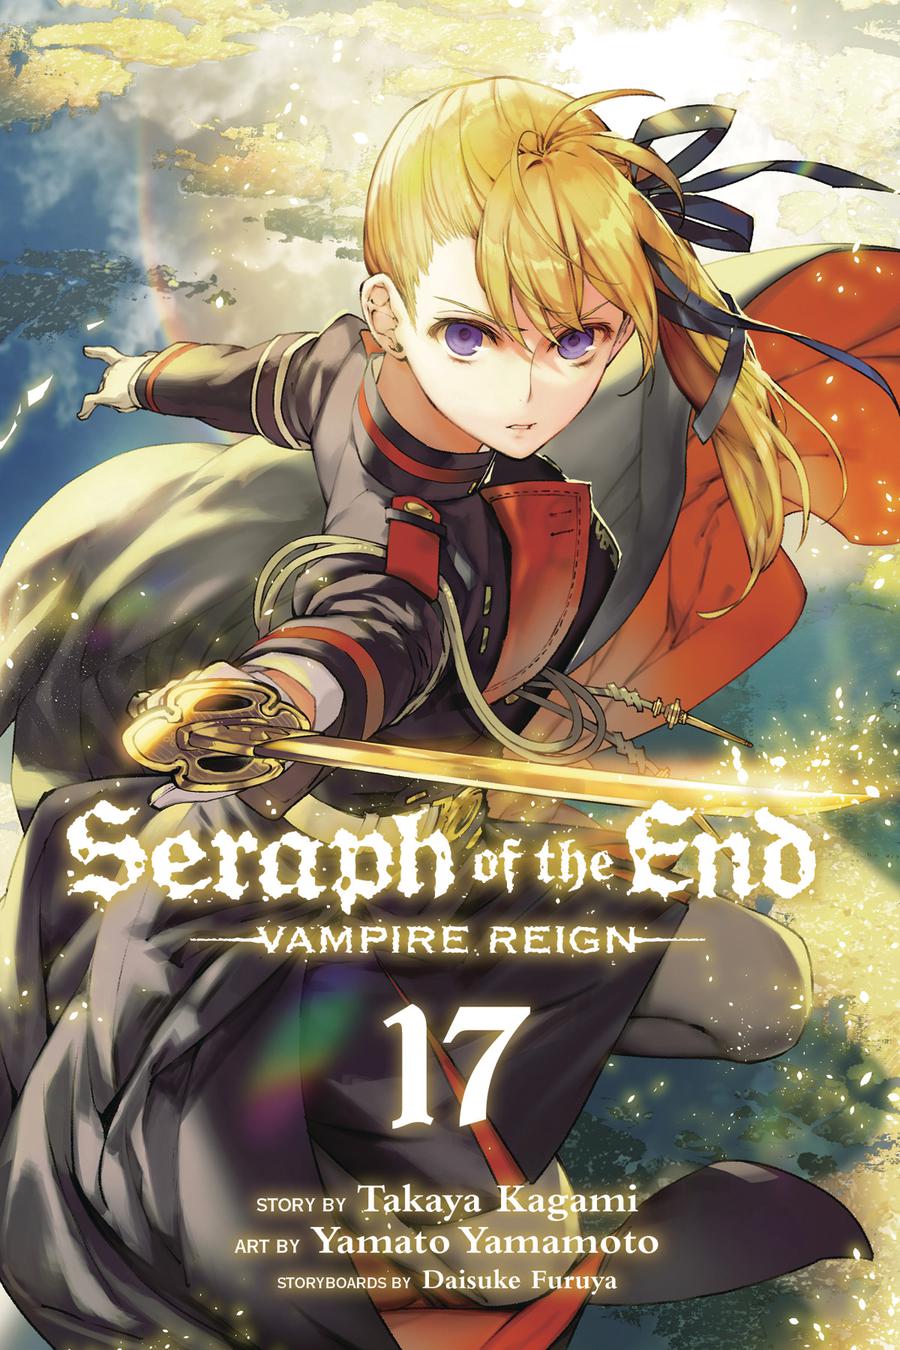 Seraph Of The End Vampire Reign Vol 17 TP